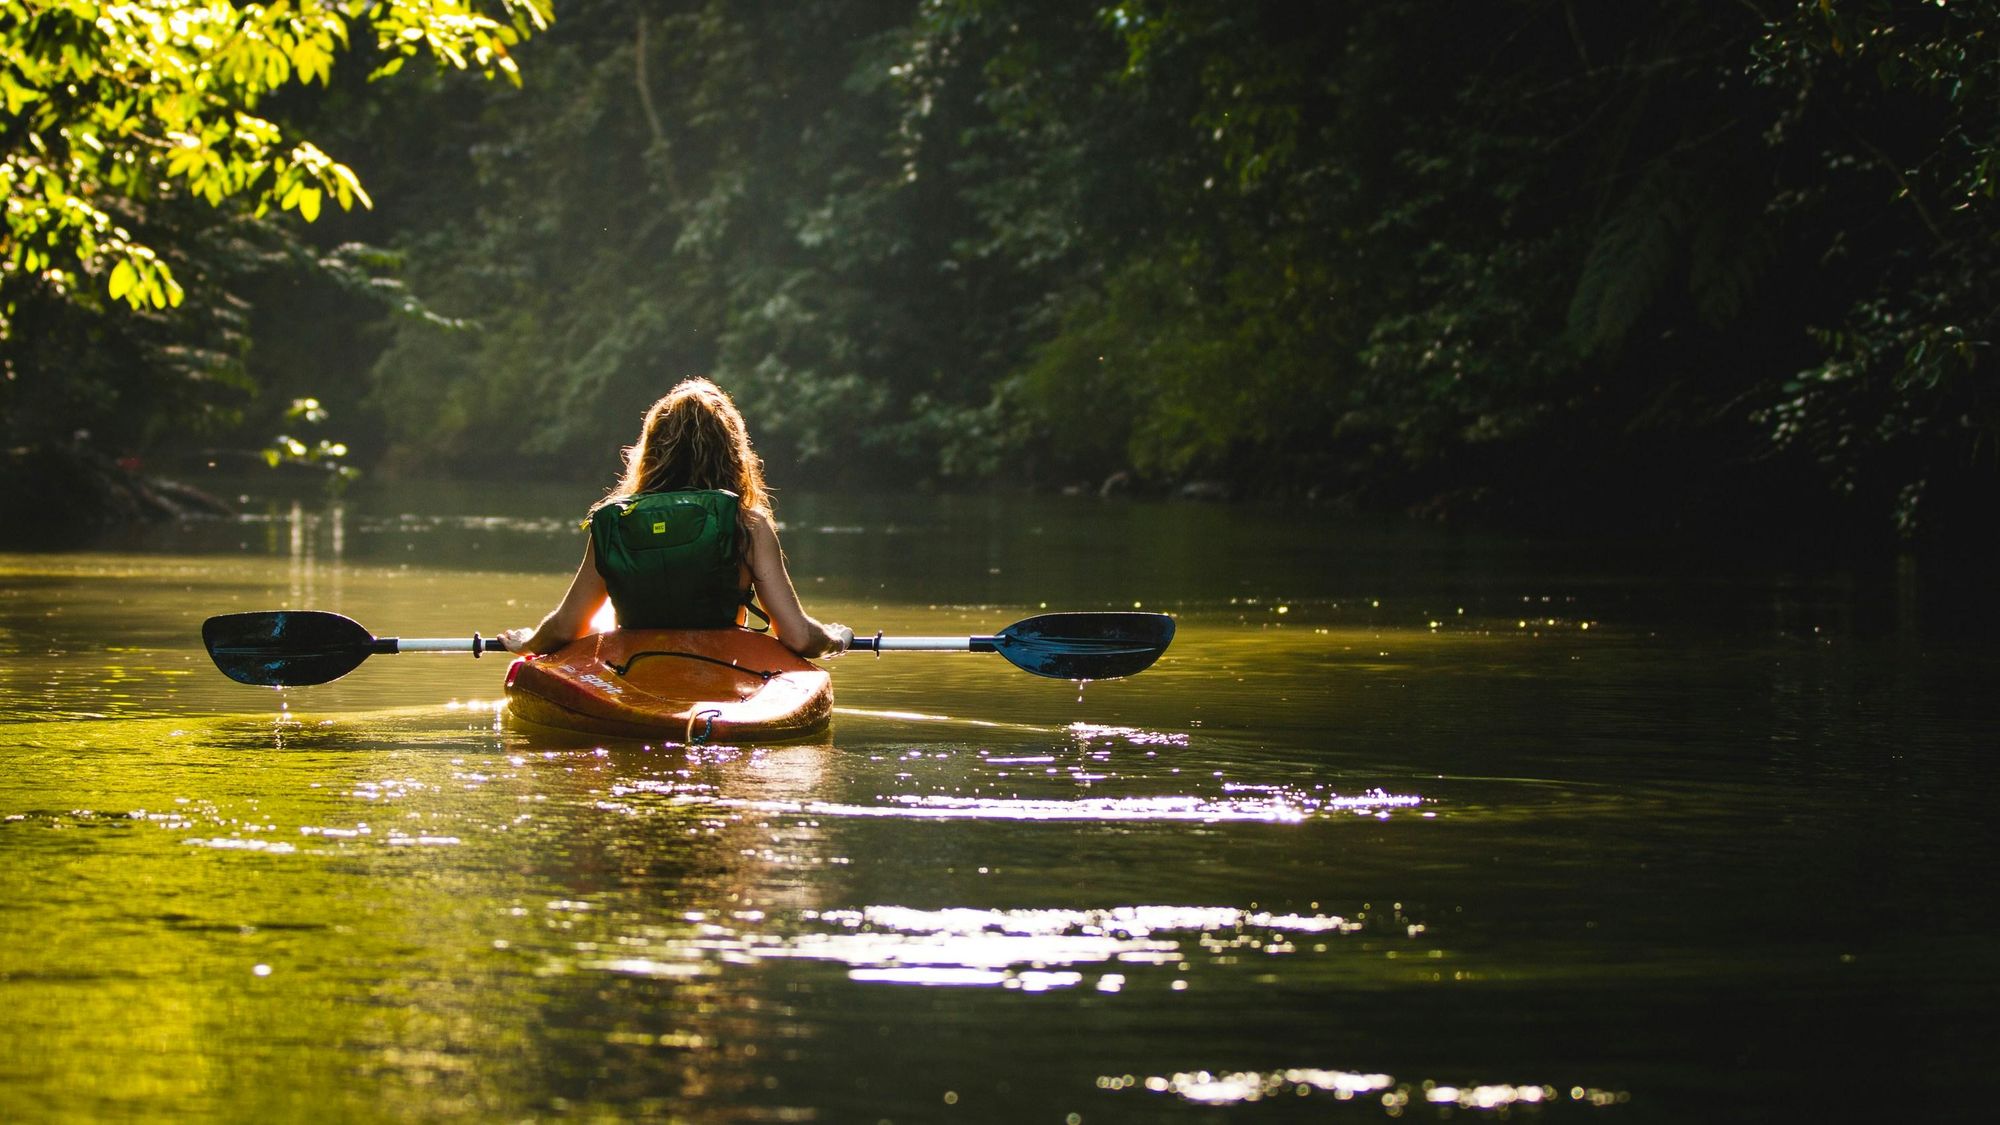 A woman finds a moment of tranquillity on a river flanked by forests. Photo: Filip Mroz/Unsplash